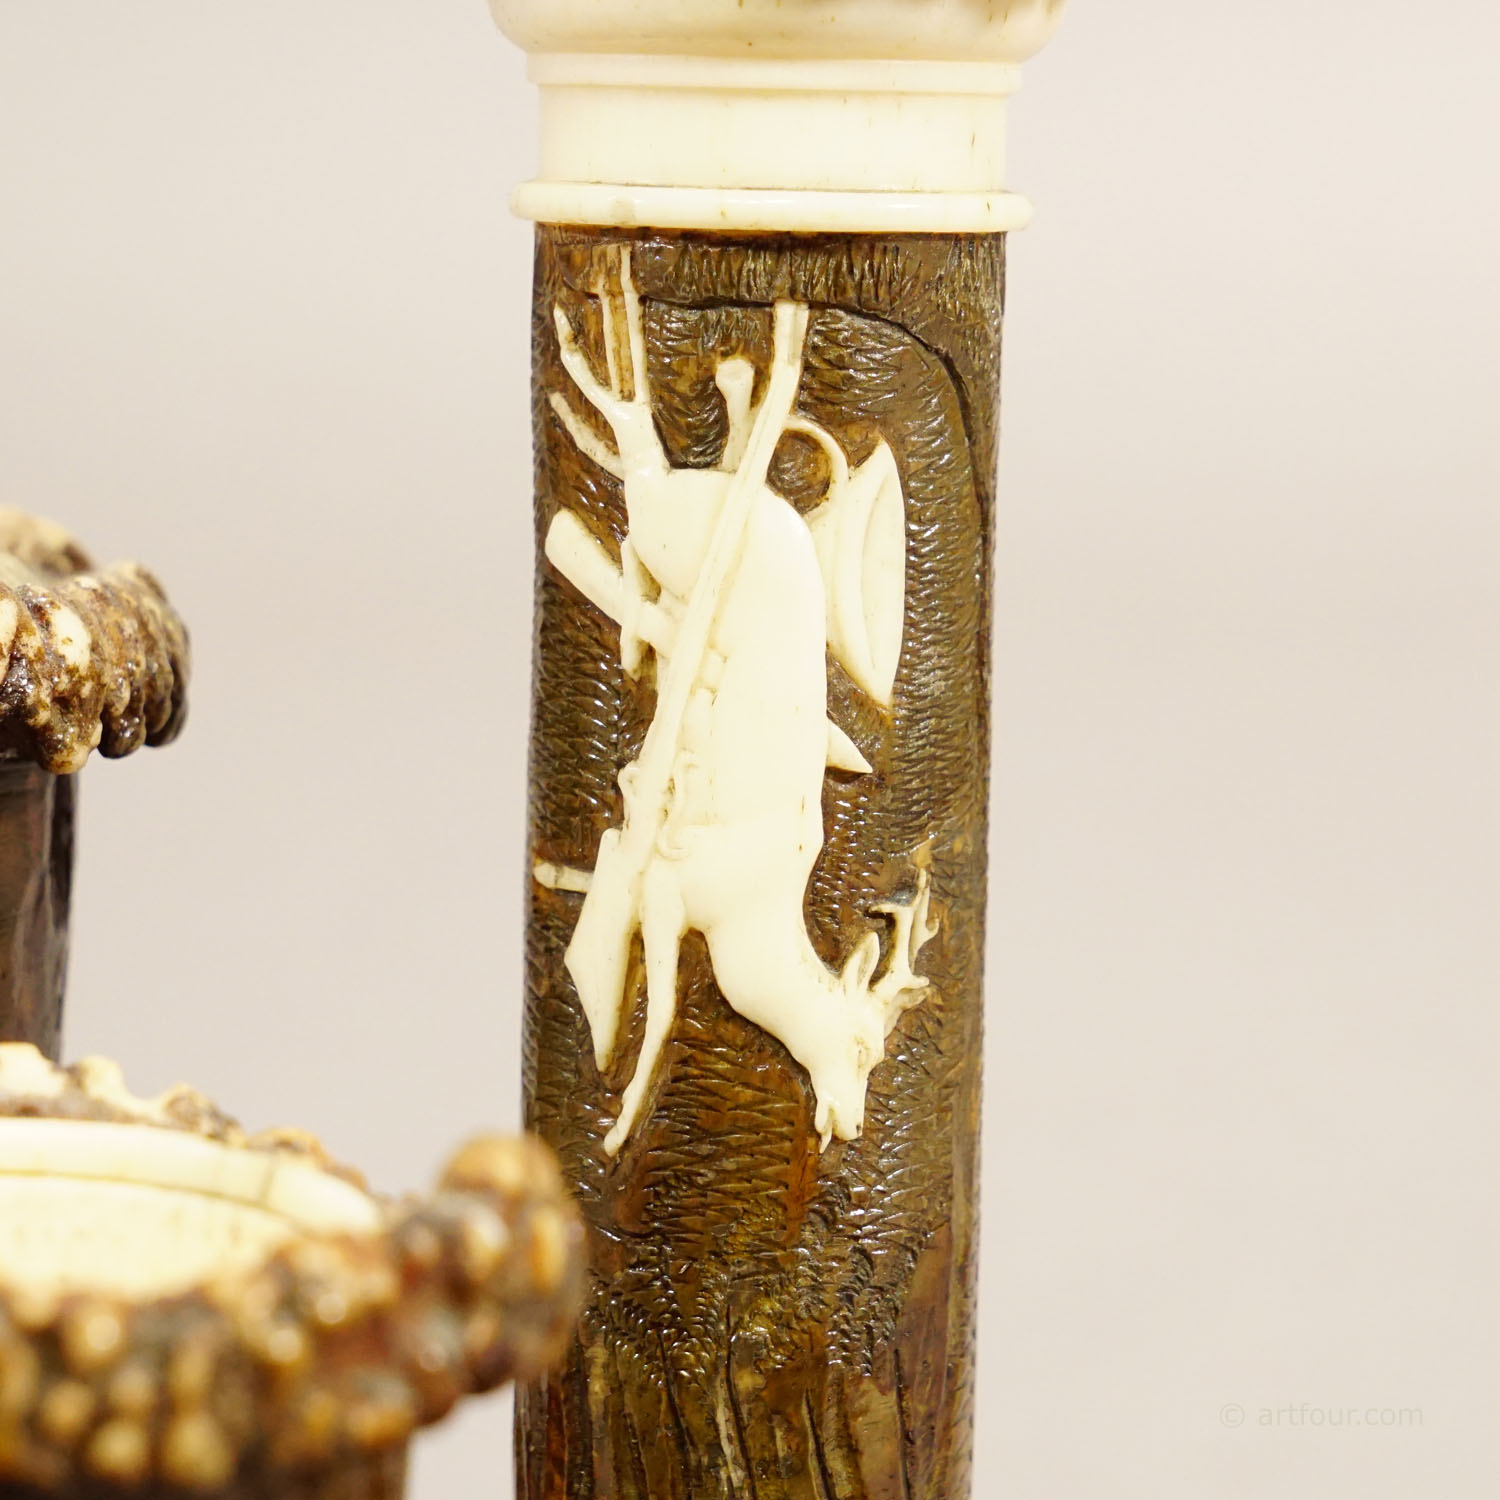 Rare Antler Desk Standish with Elaborate Carvings, Germany ca. 1840